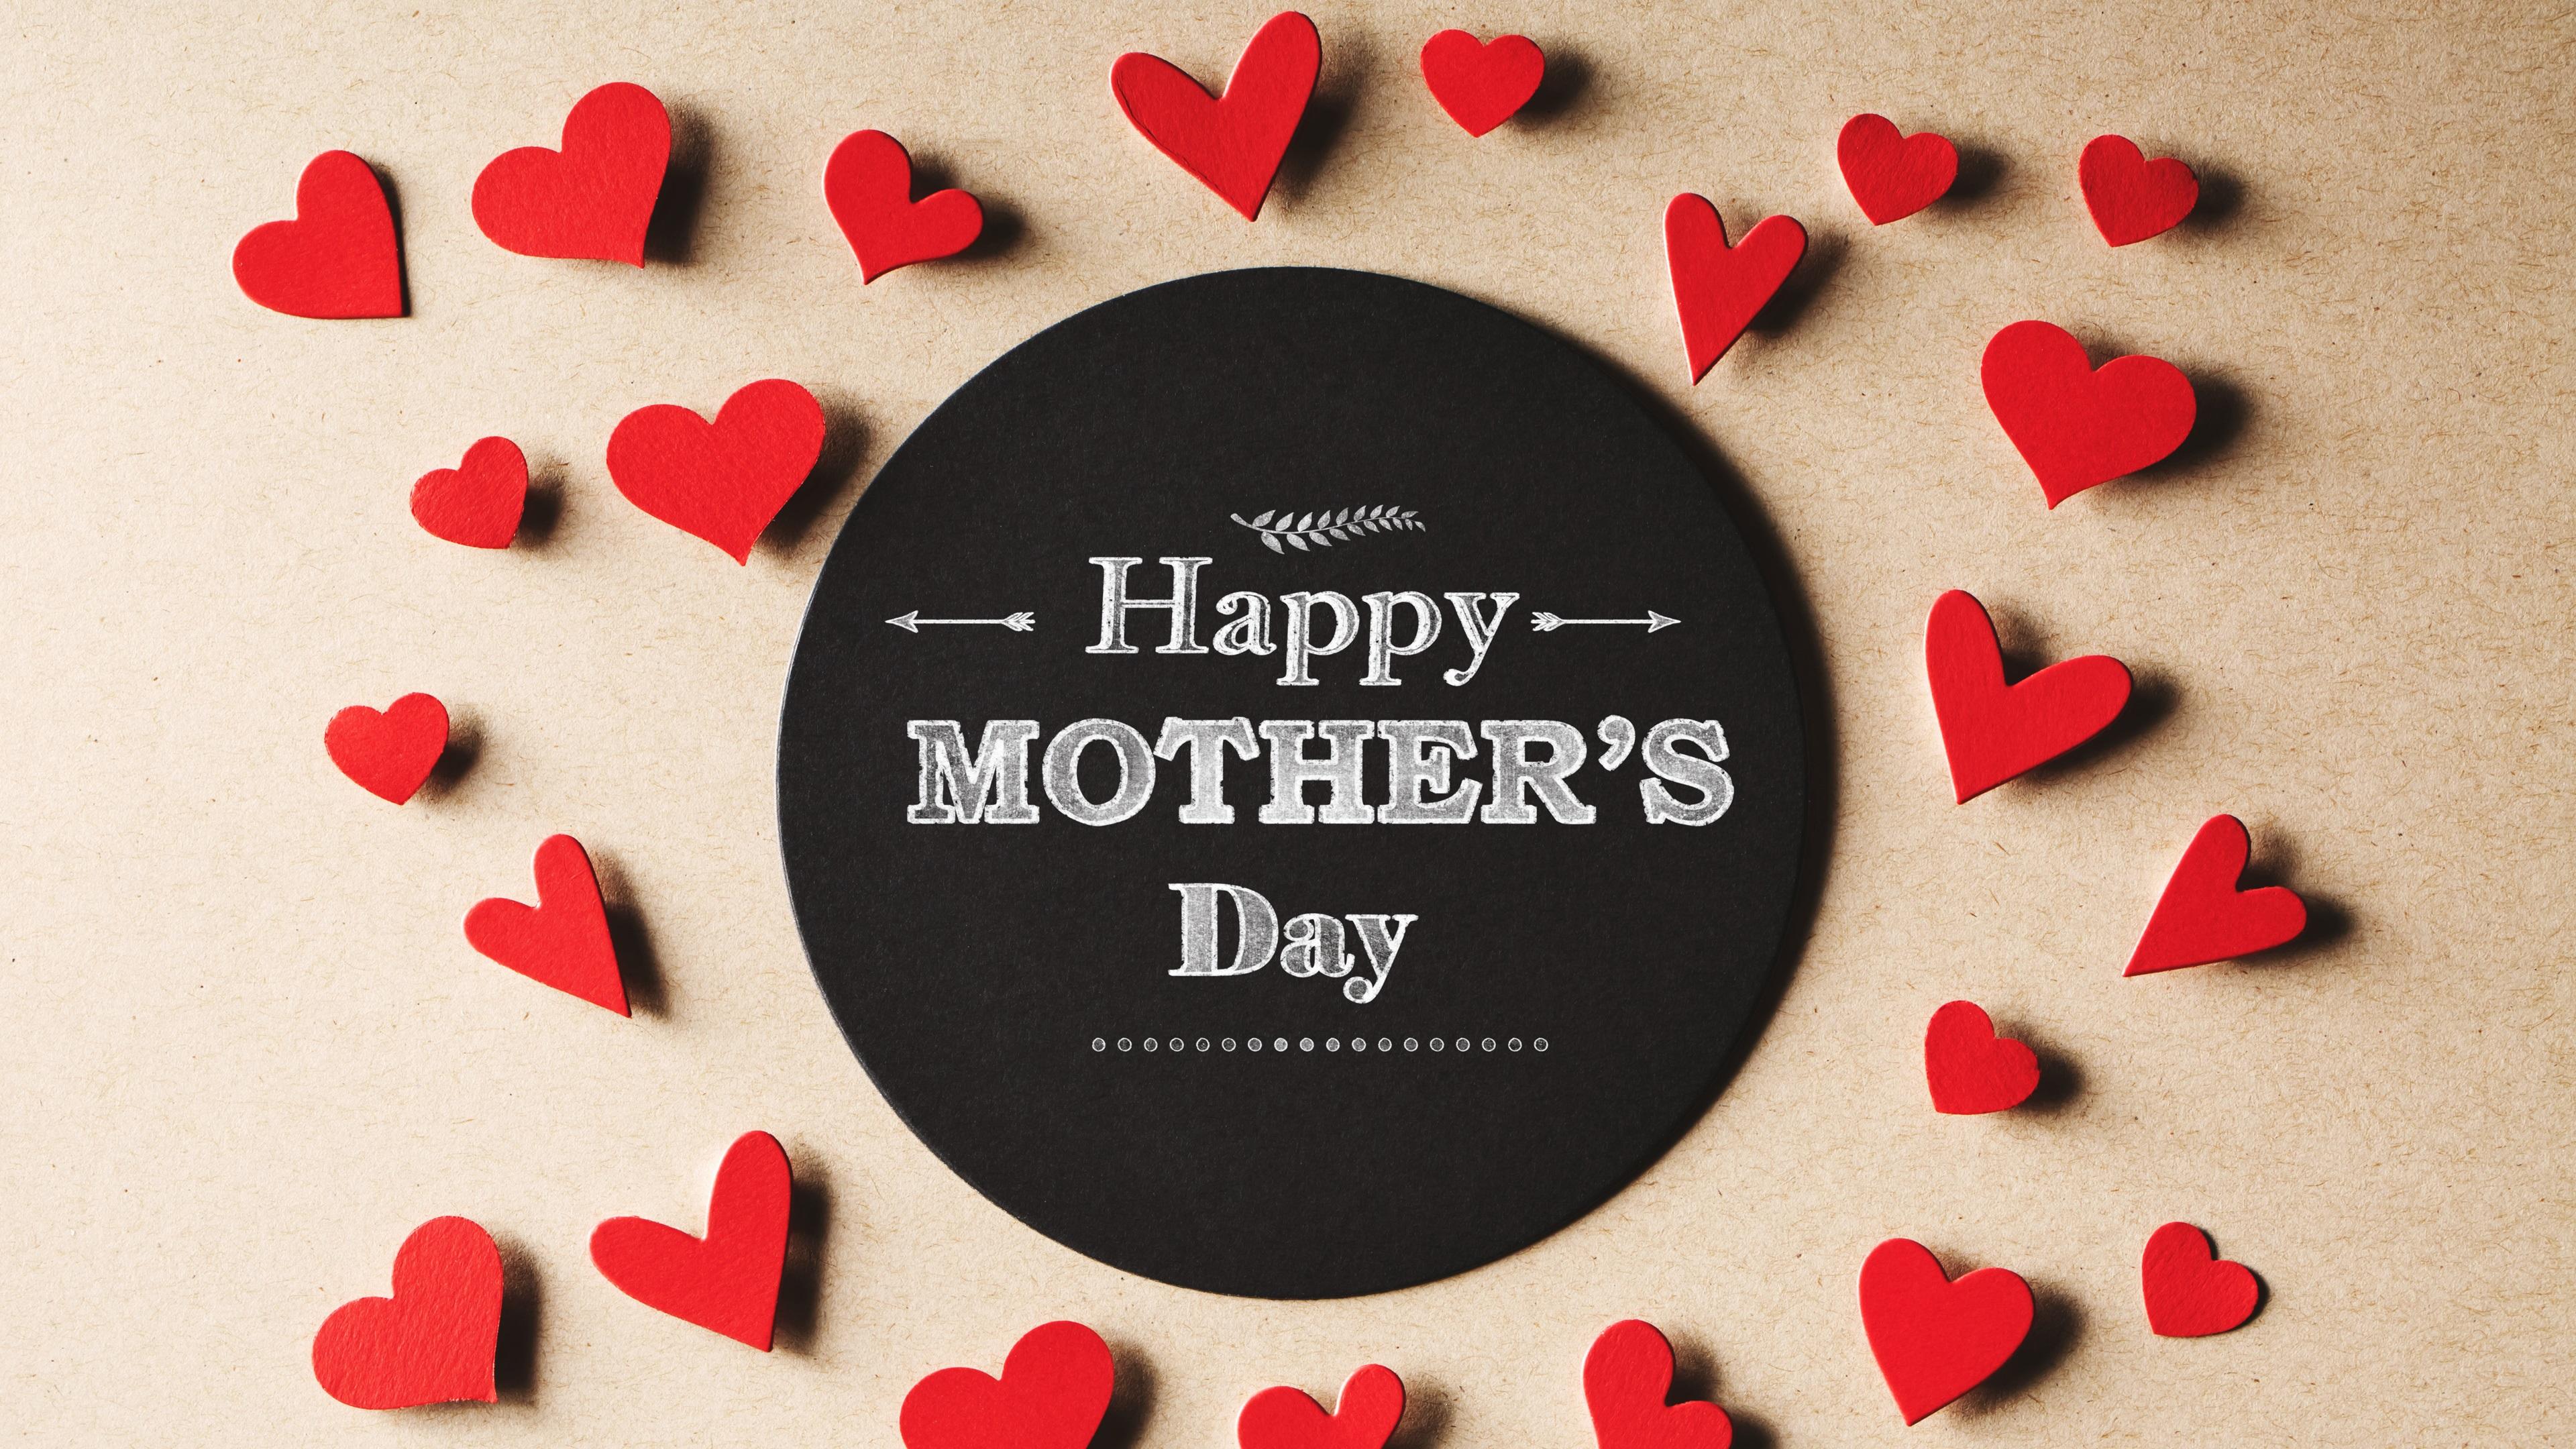 Wallpaper Happy Mother's Day, love hearts 3840x2160 UHD 4K Picture, Image